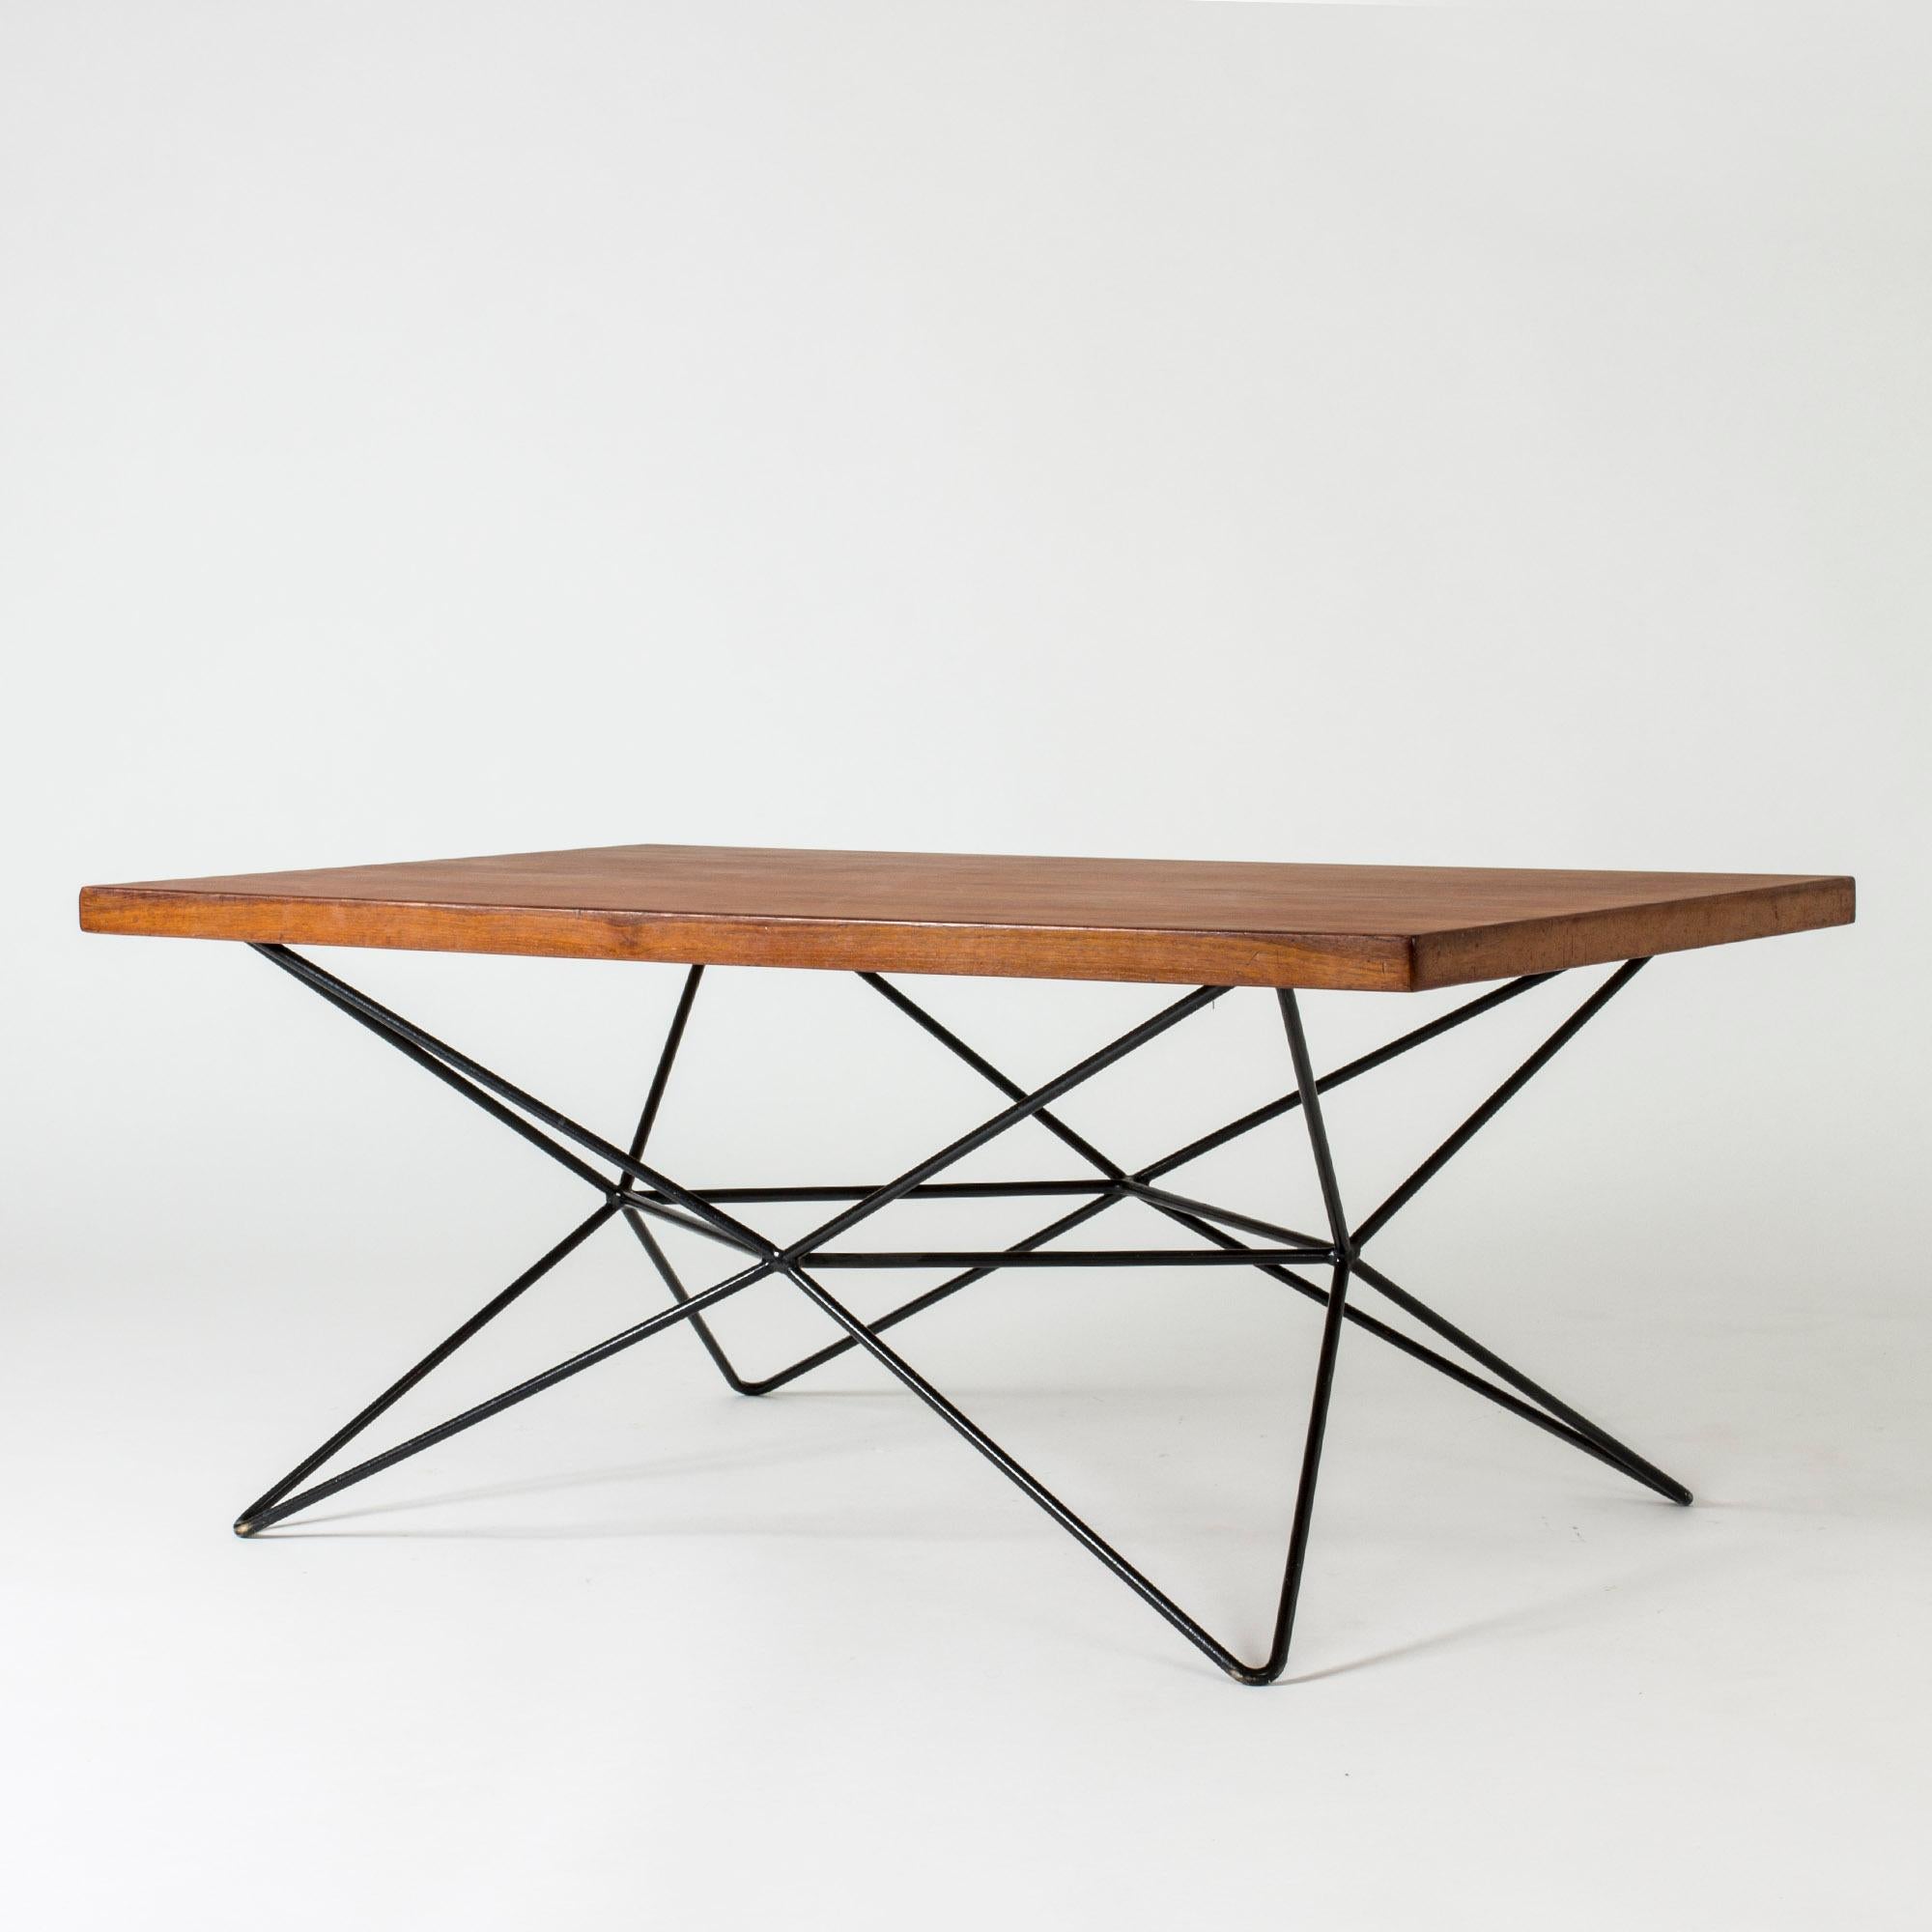 Ingenious, striking table by the architect Bengt Johan Gullberg that can be set into three positions: coffee table, dining table, and bar table. The lacquered metal base is turned on different ends to adjust to the three heights and the teak